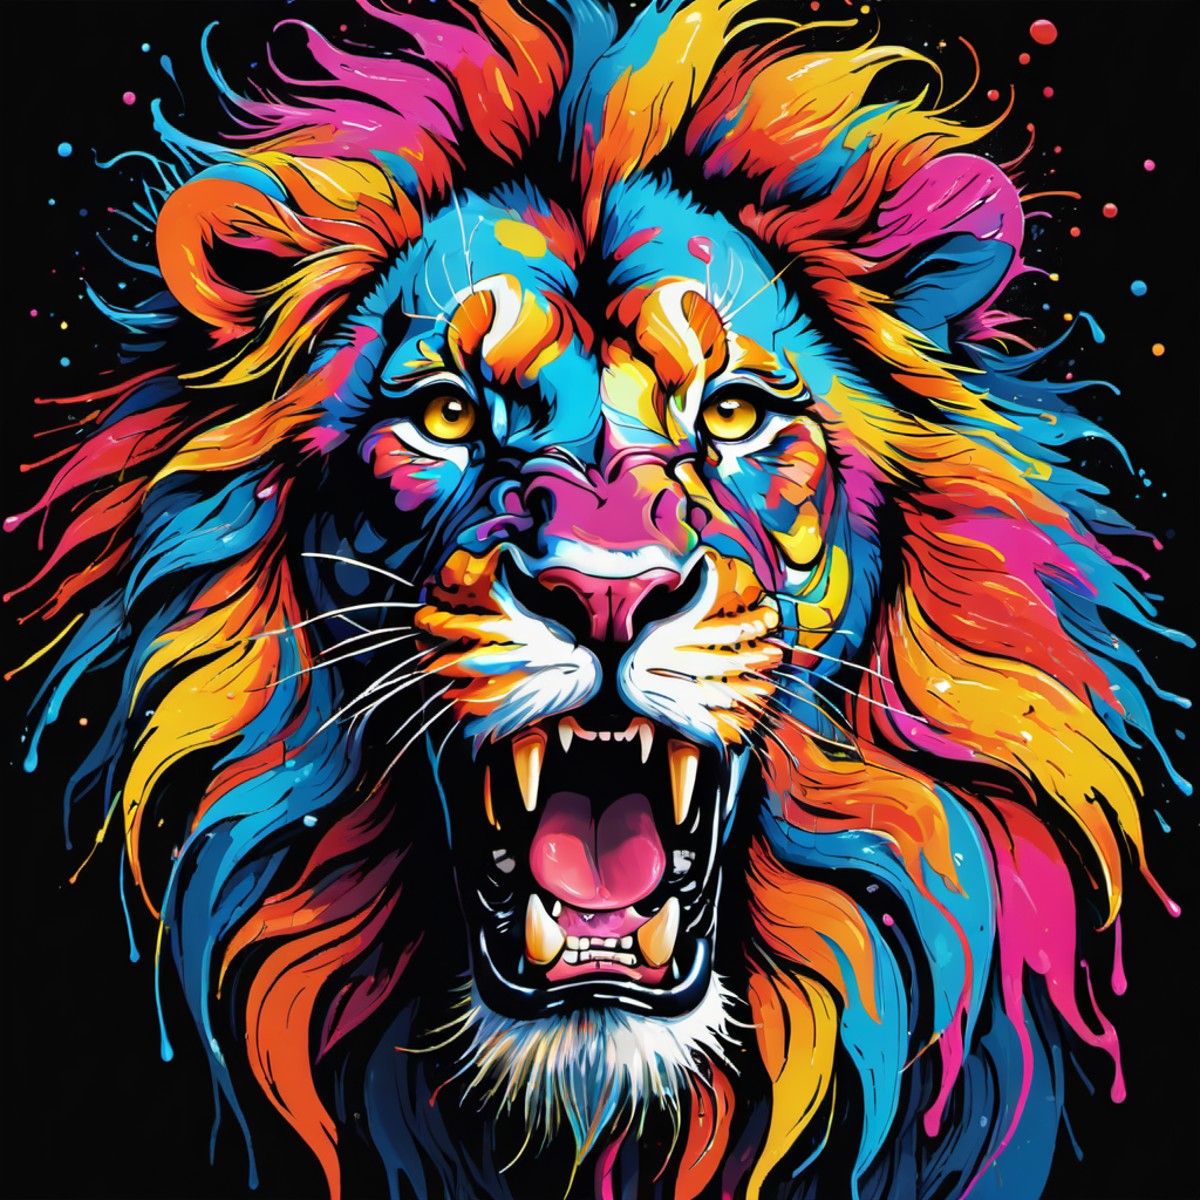 dripping roaring  lion portrait in the style of frank miller, neon colourful, cell shaded cartoon, lots of  dripping paint...